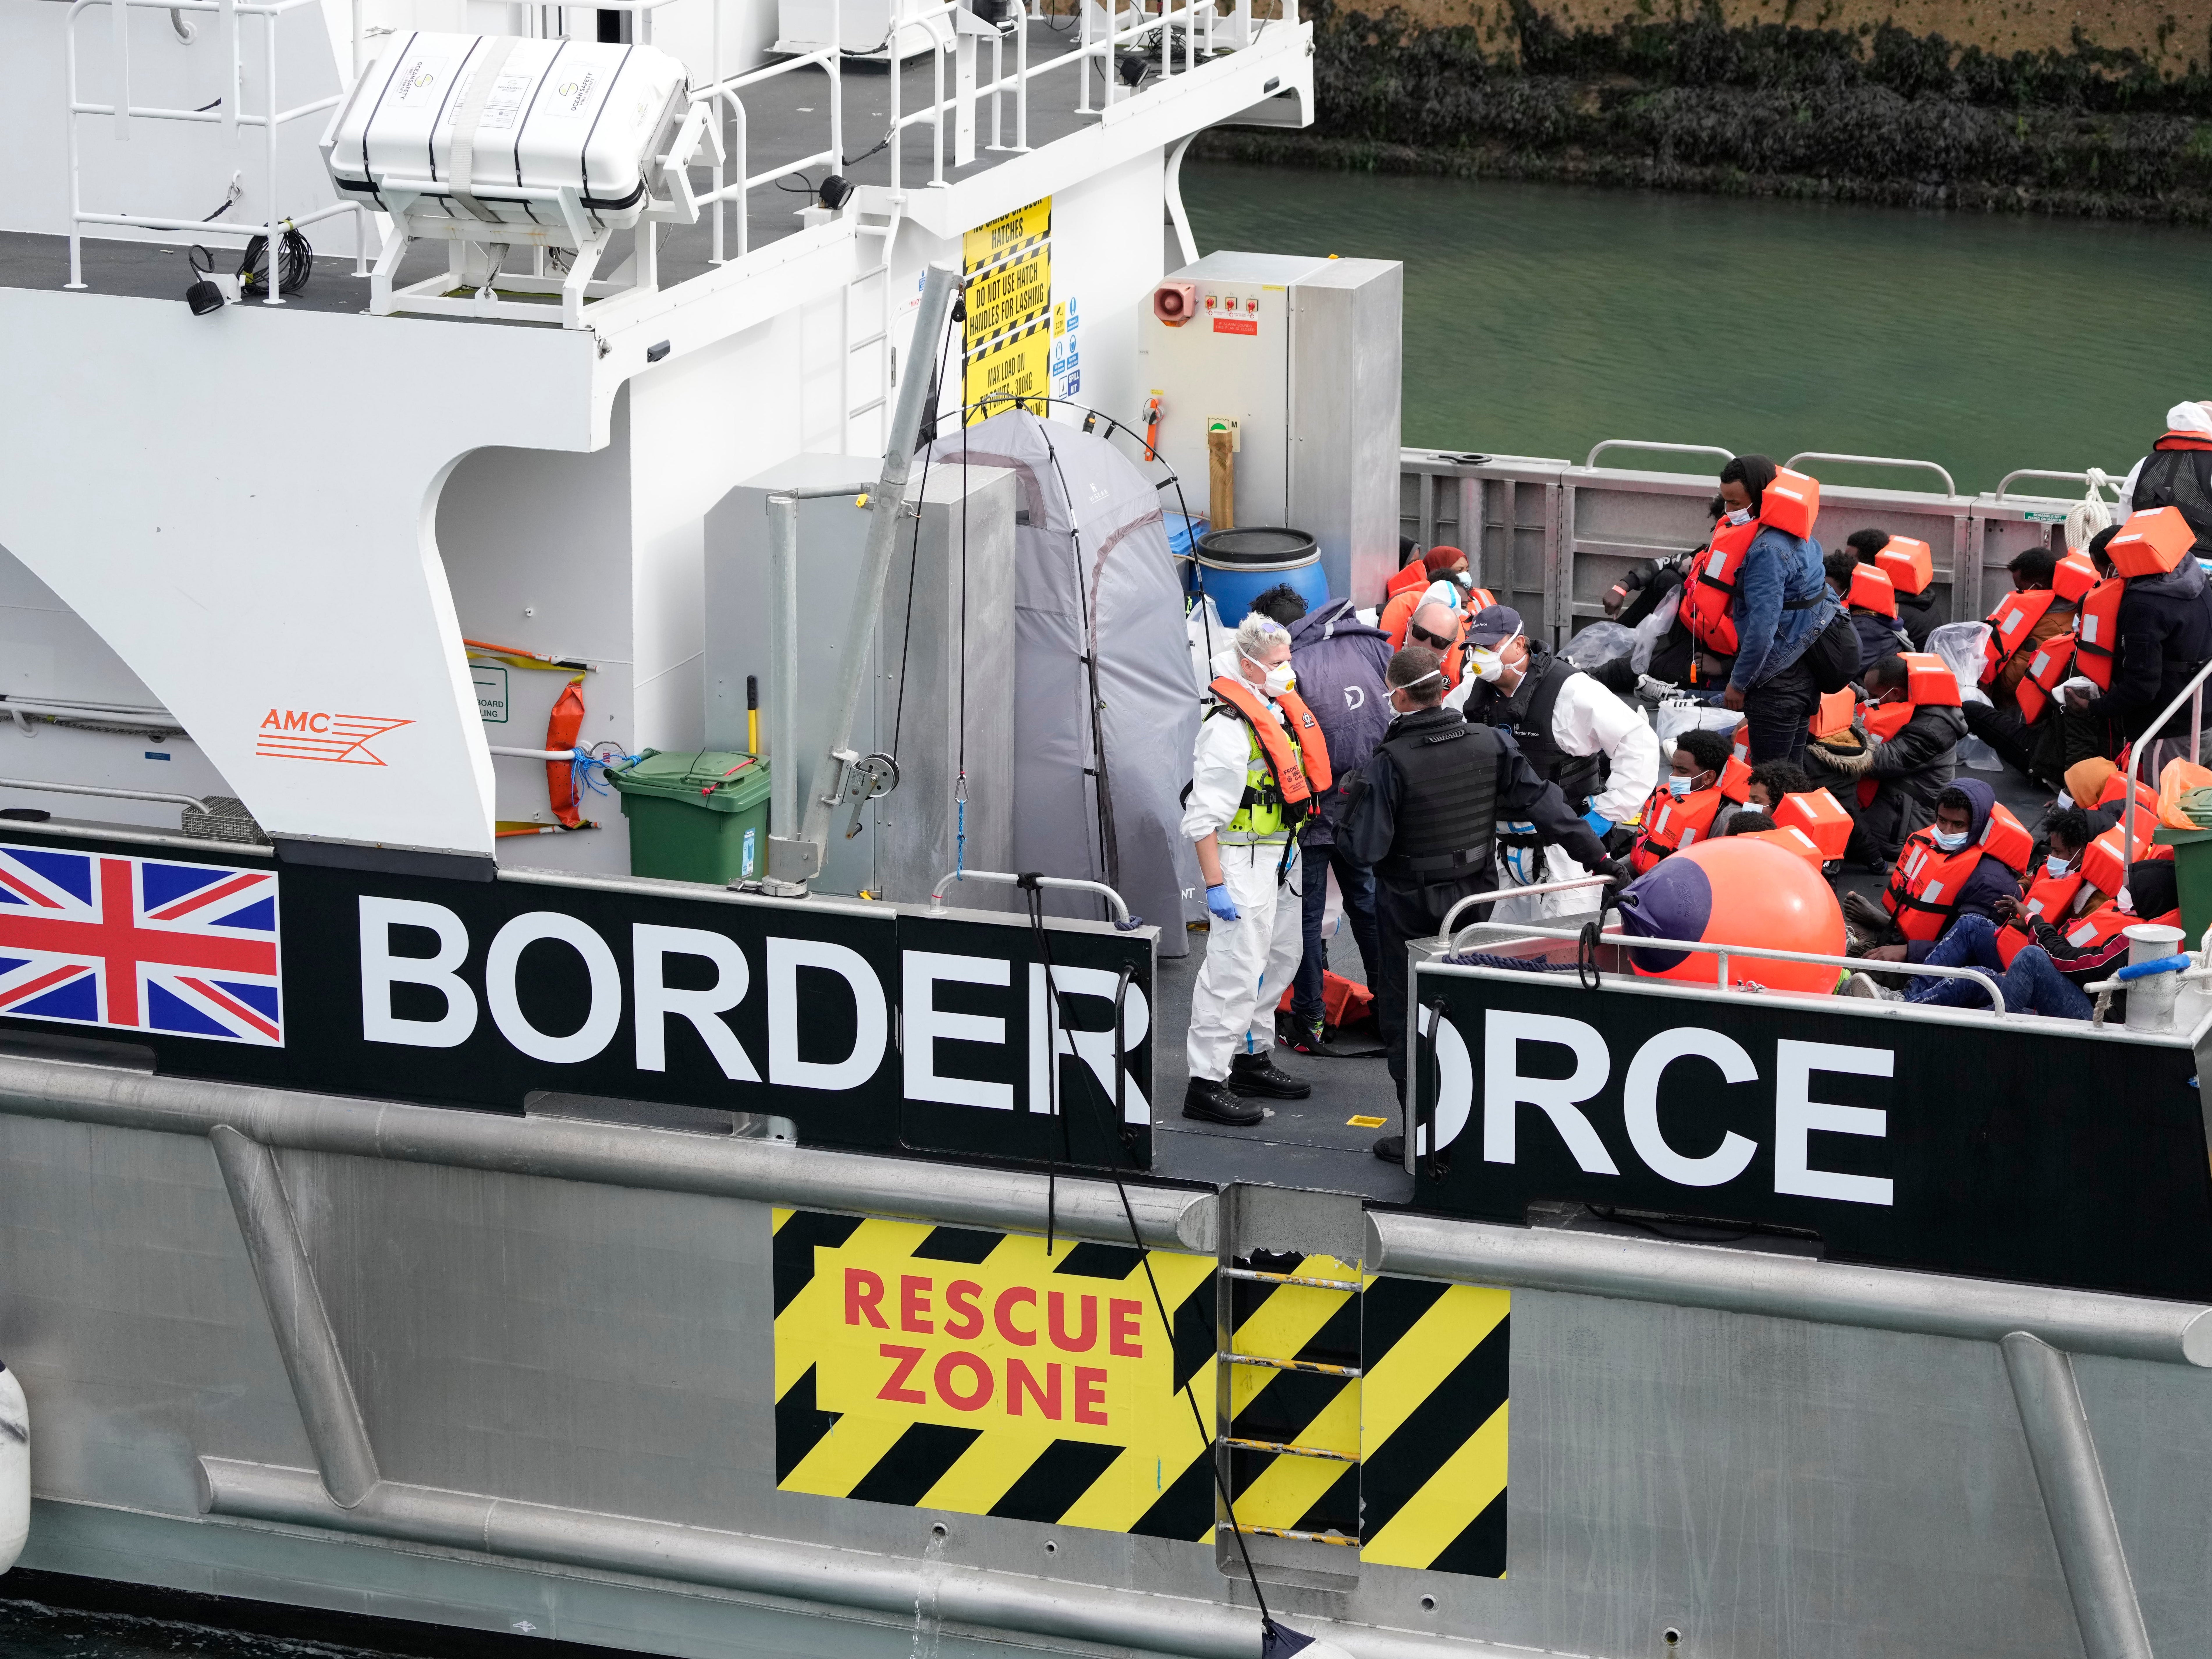 People thought to be migrants are brought into port after being picked up in the English Channel by a British border force vessel on 13 August